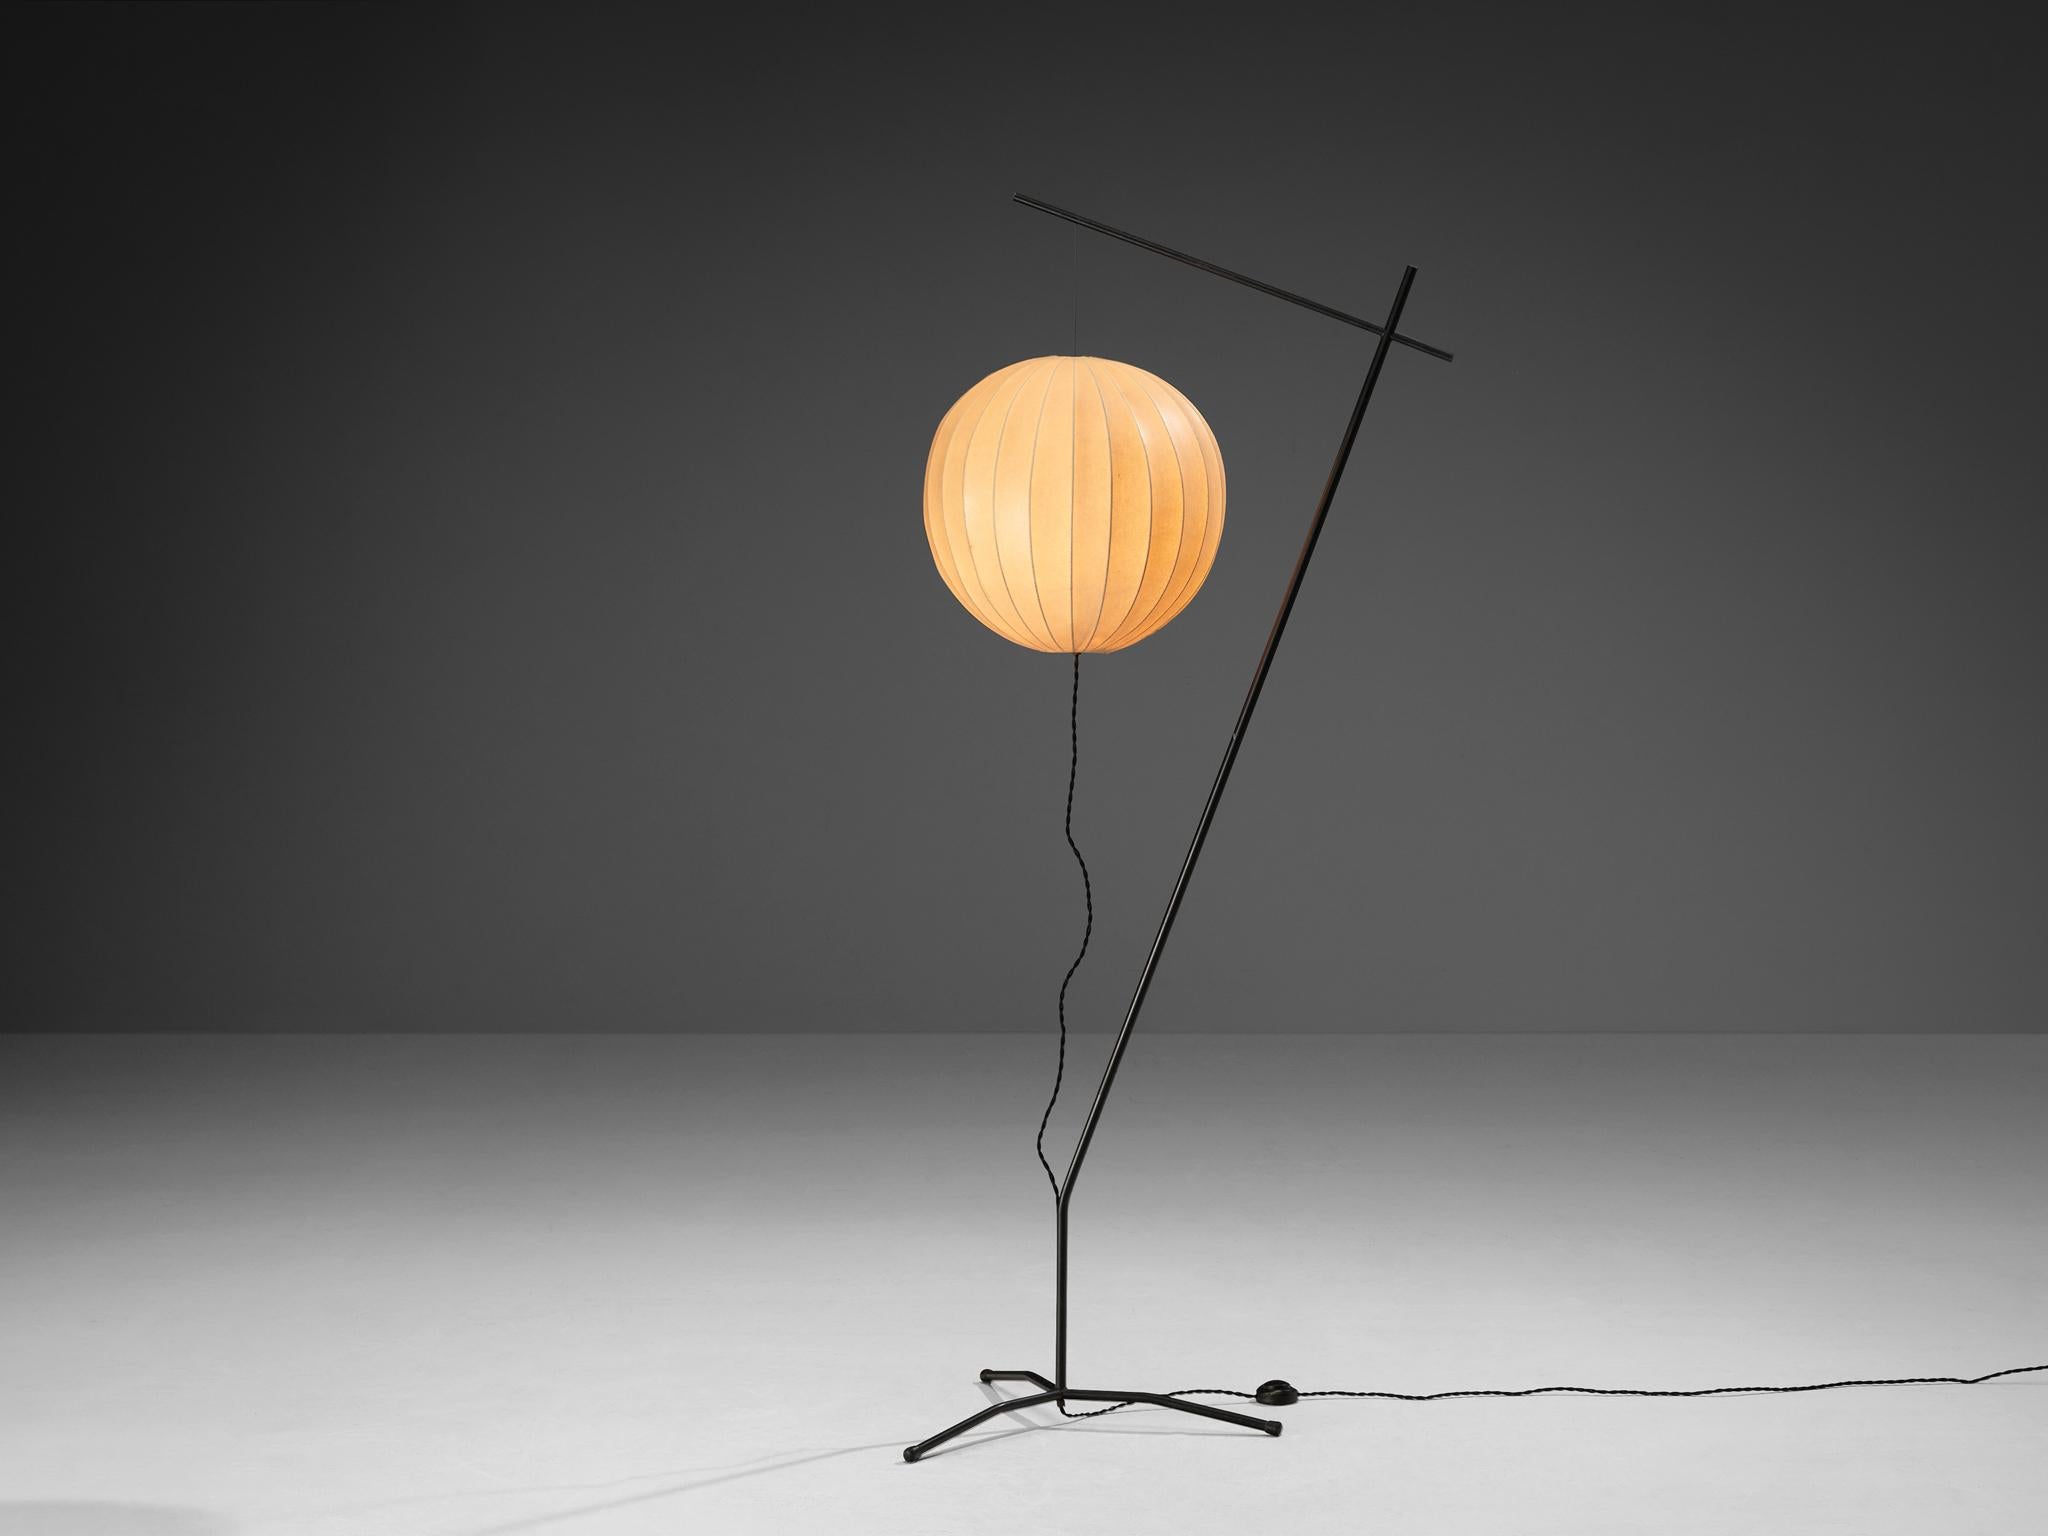 RAAK, floor lamp, model ‘D-2004’, coated iron, fiberglass, wire, The Netherlands, 1962 

The cocoon globe floor lamp is designed by the Dutch lighting company RAAK Amsterdam, a significant Dutch lighting manufacturer of the 20th century established